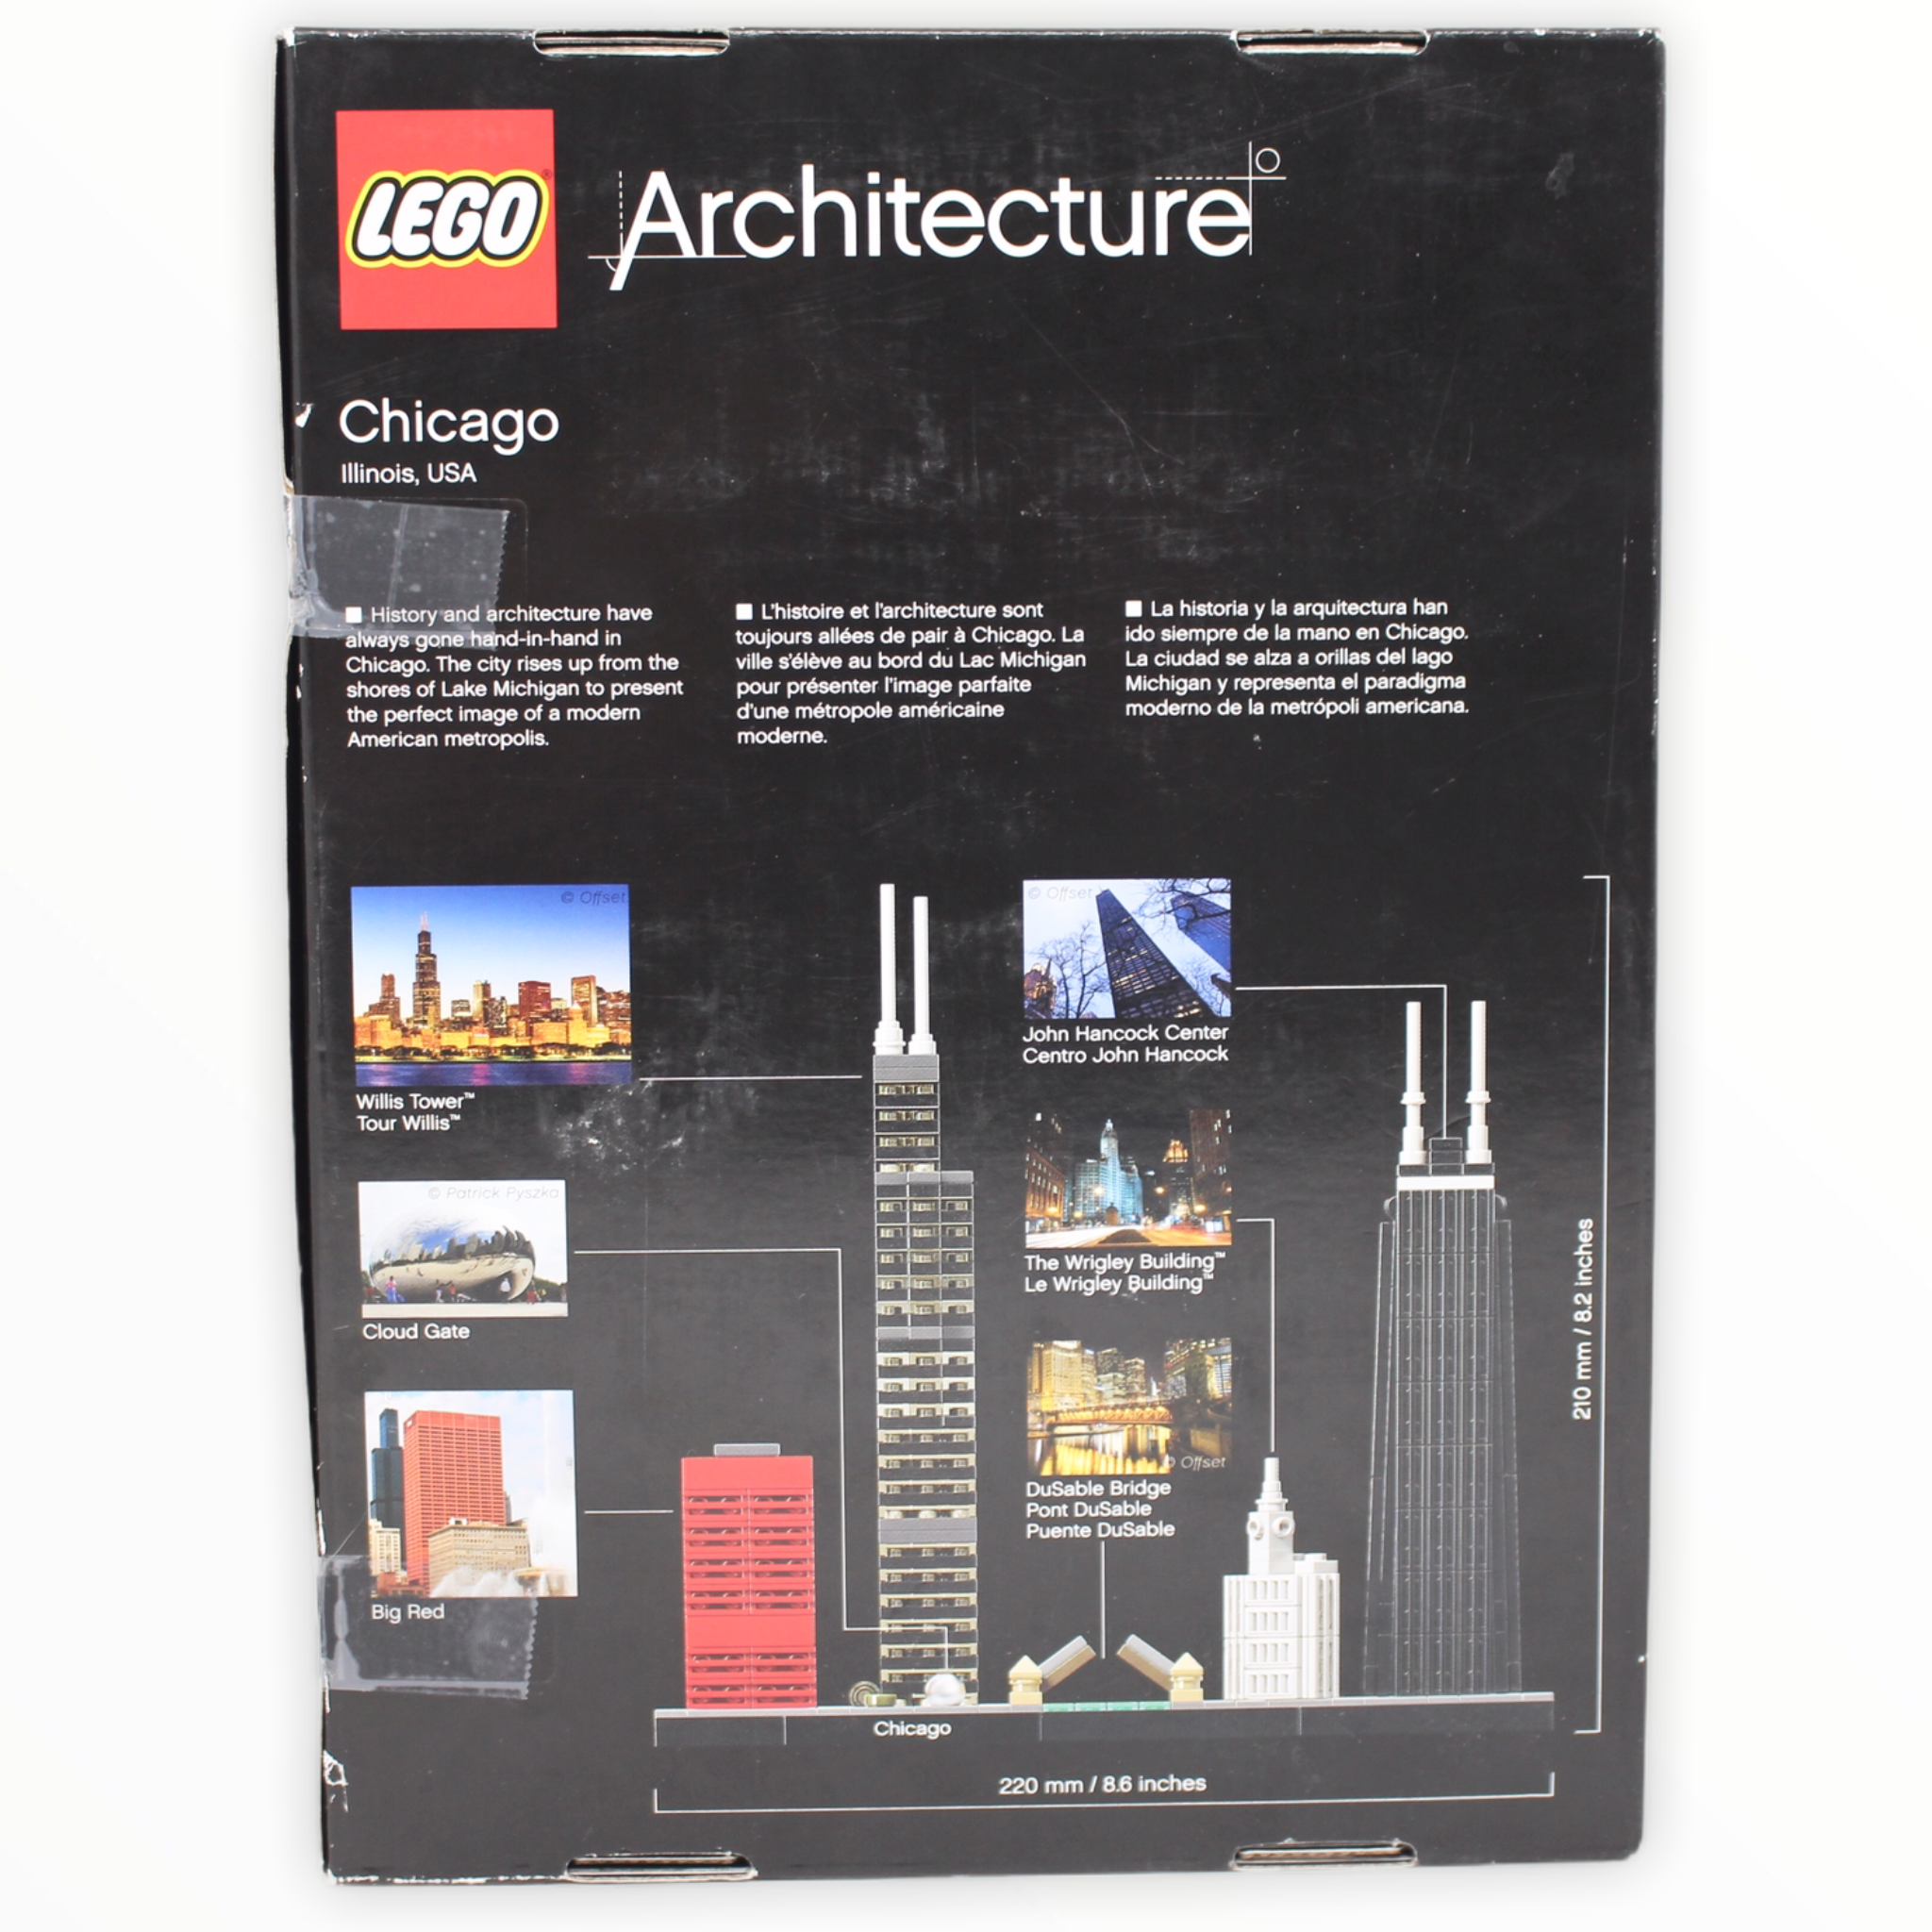 Certified Used Set 21033 Architecture Chicago